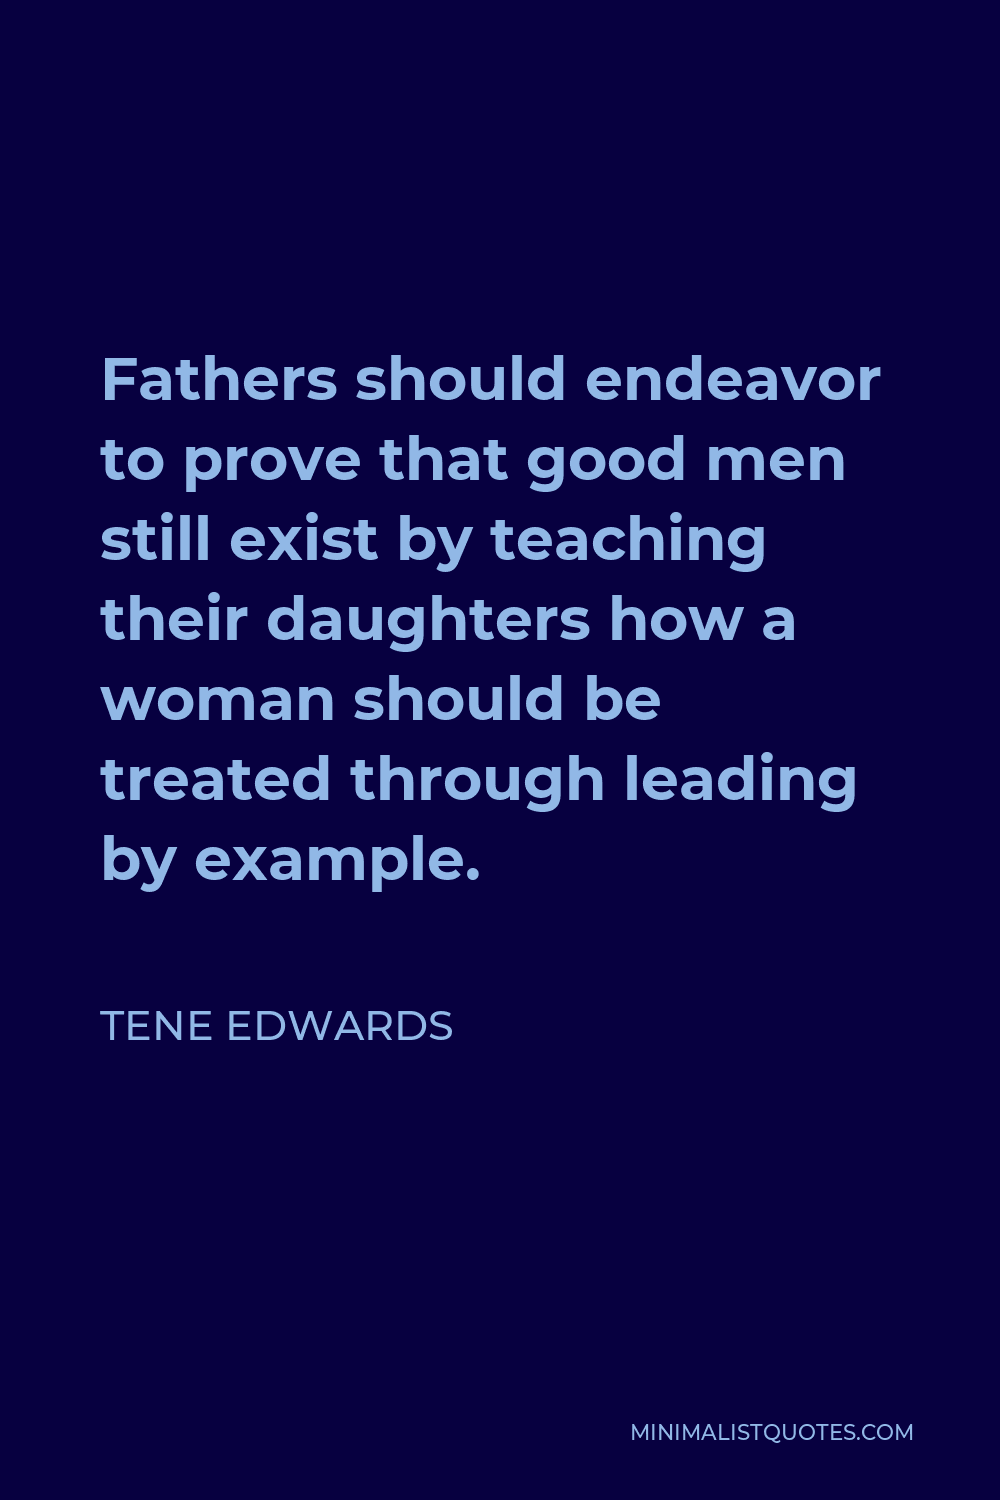 Tene Edwards Quote - Fathers should endeavor to prove that good men still exist by teaching their daughters how a woman should be treated through leading by example.